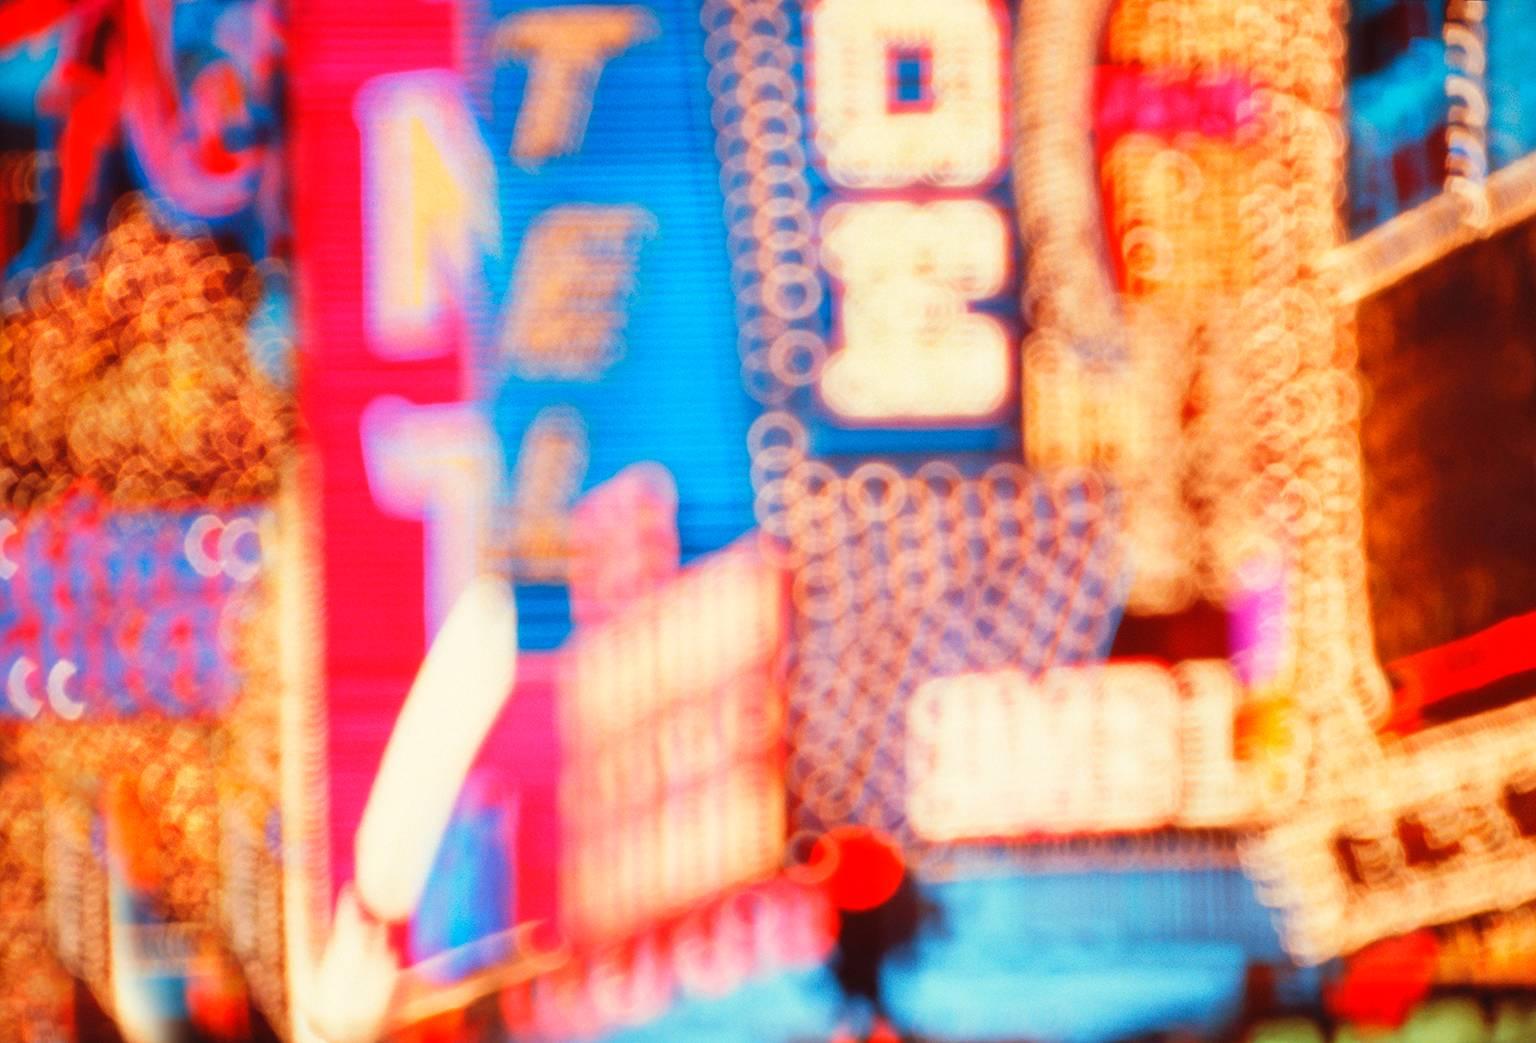 Mitchell Funk Abstract Photograph - Fremont Street Neon. Old Las Vegas, 1974